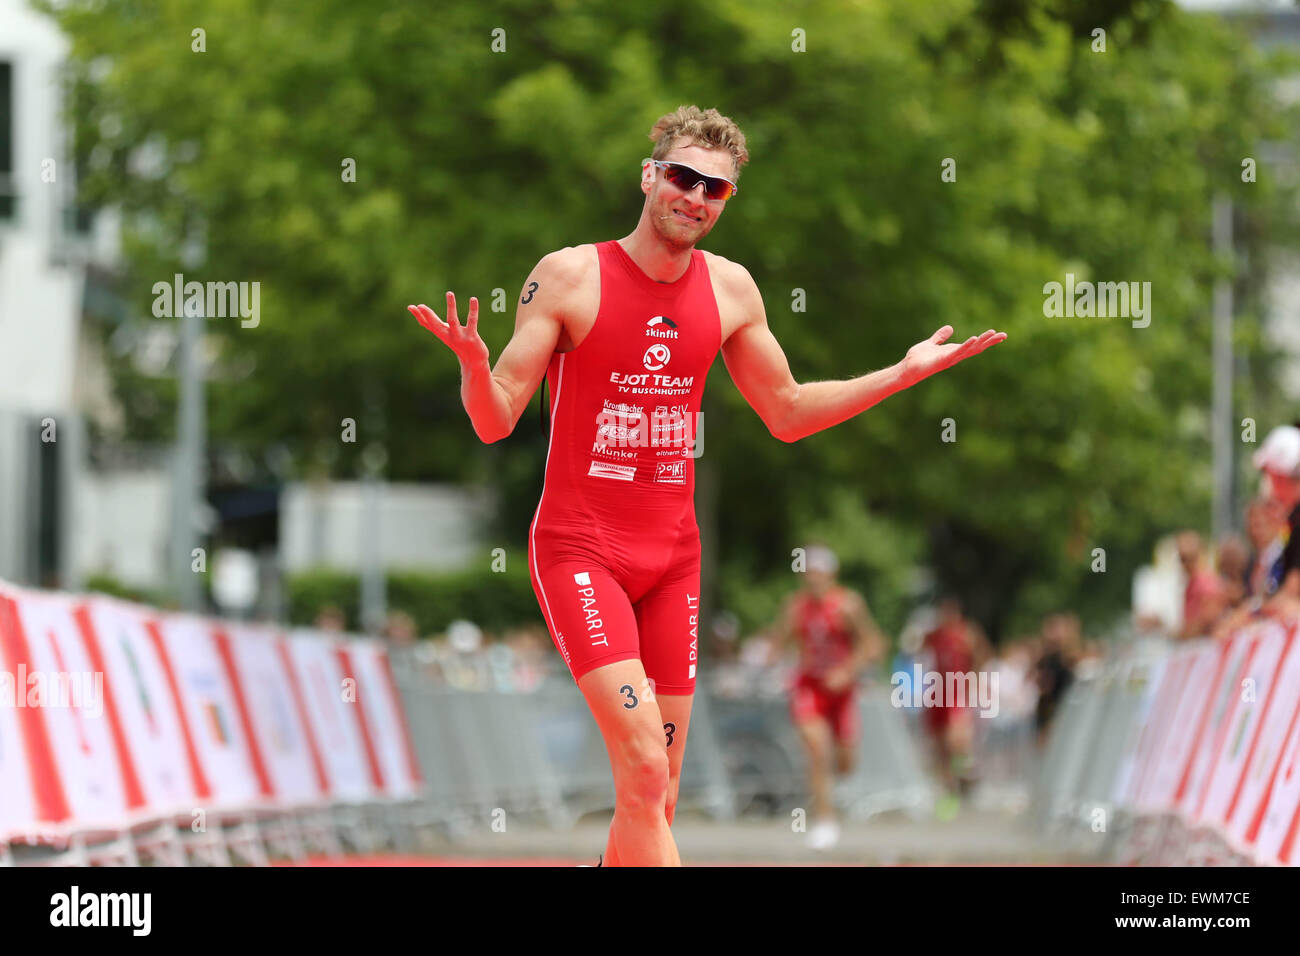 28.06.2015. D&#xfc;sseldorf, Germany. T3 Triathlon D&#xfc;sseldorf. Mens U23 Elite race. 3 Buchholz Gregor takes a bow having gone the wrong way at the finish and leapt the fence, before coming in second. Stock Photo